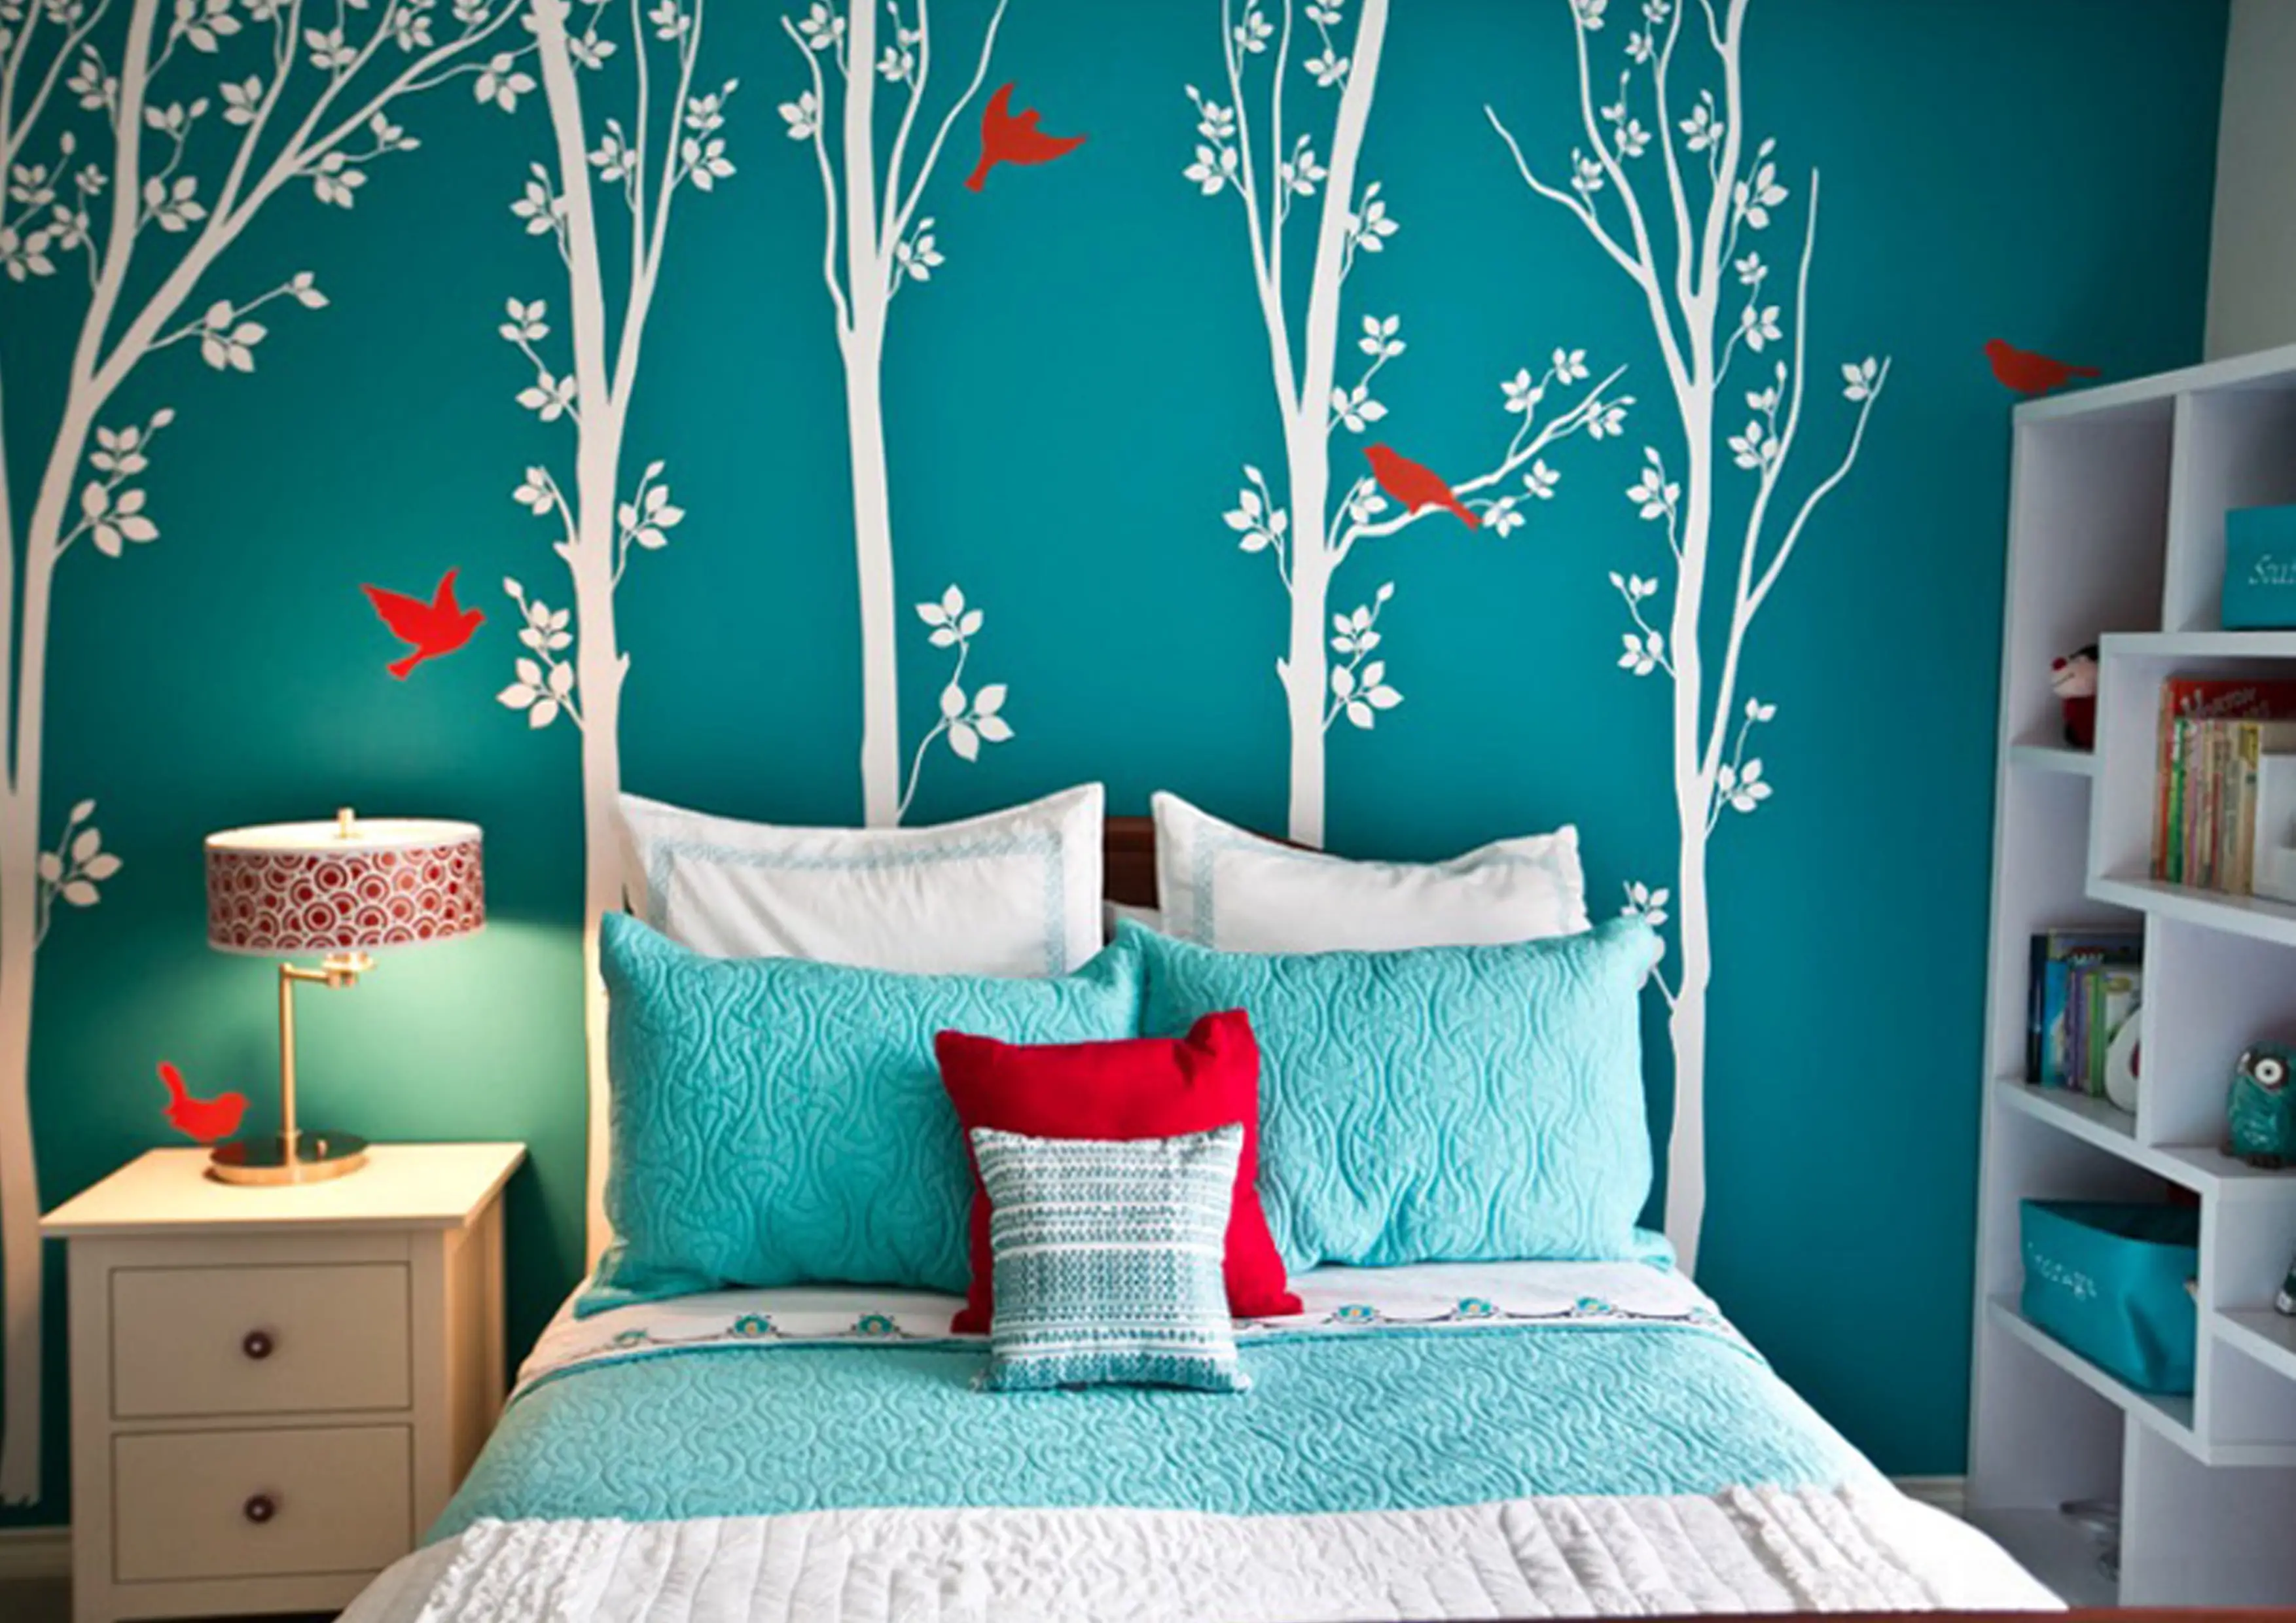 Red and Turquoise Bedroom